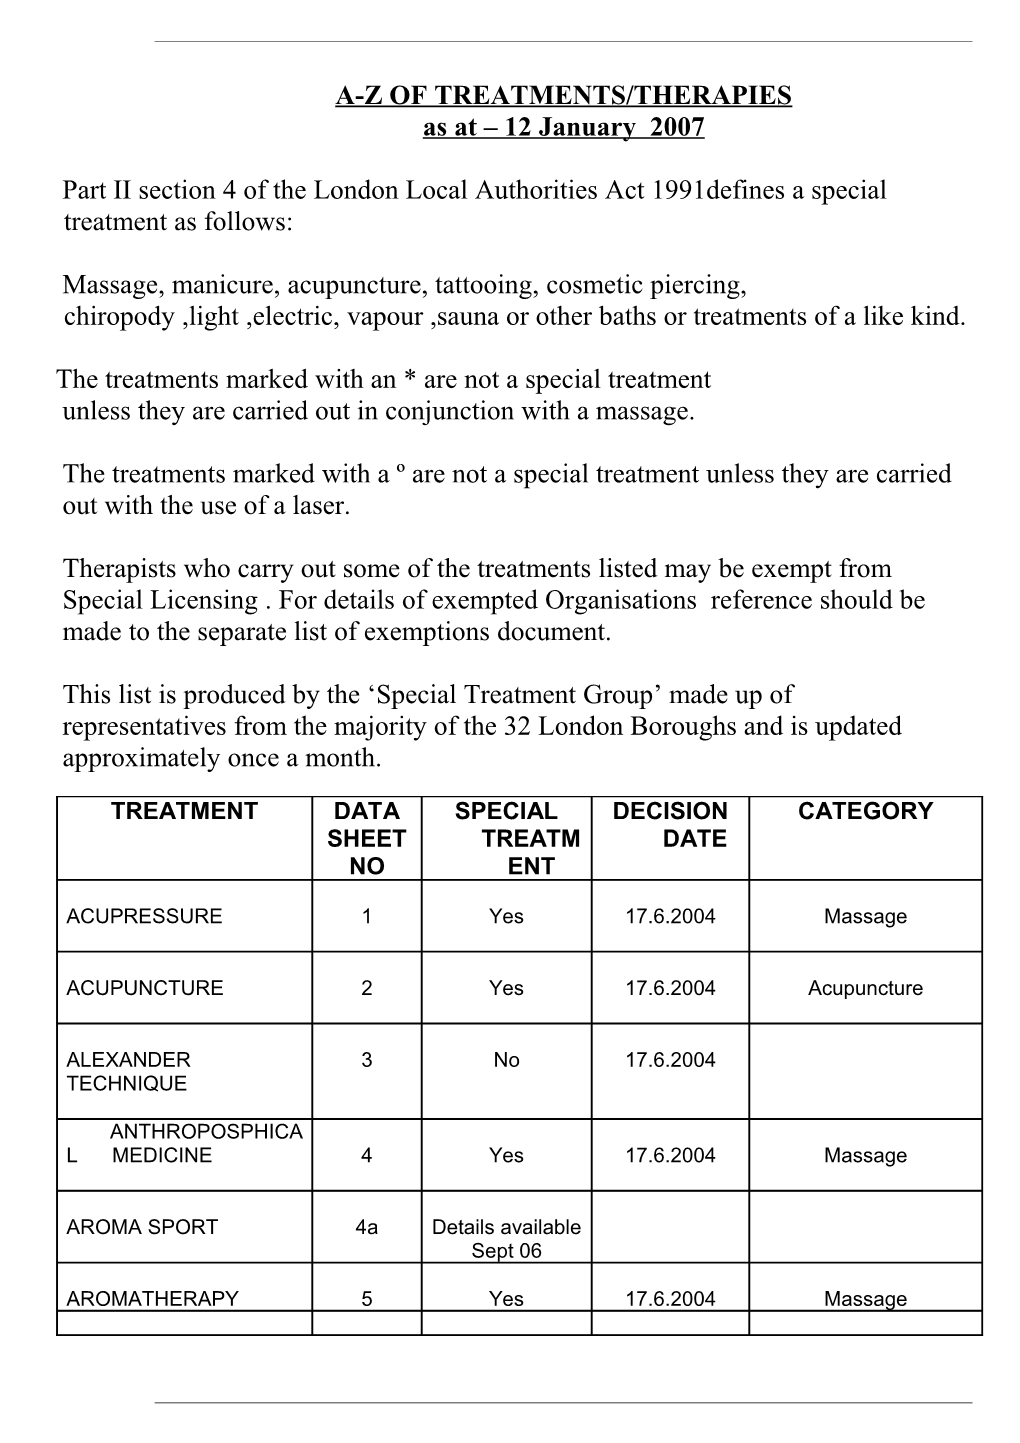 A-Z of Treatments/Therapies